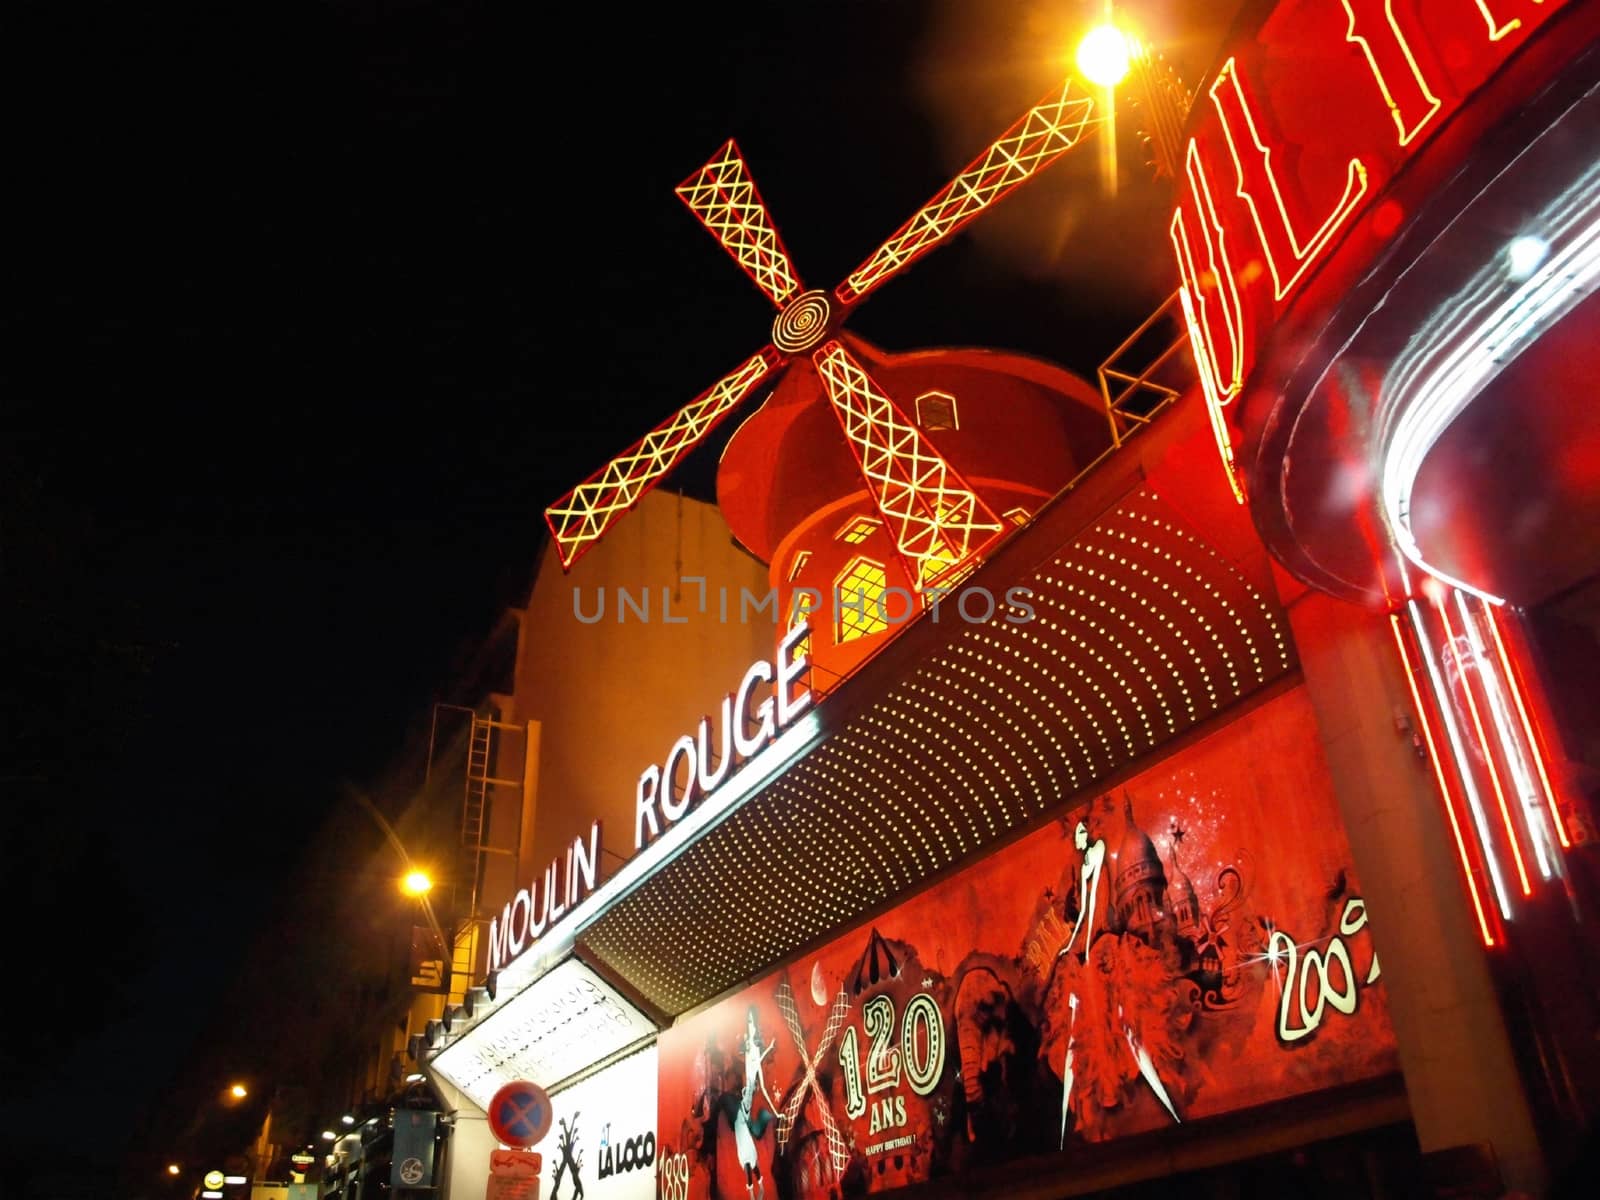 PARIS FRANCE - JULY 24: The Moulin Rouge by night July 24, 2009 in Paris, France. Moulin Rouge is a famous cabaret built in 1889, locating in the Paris red-light district of Pigalle